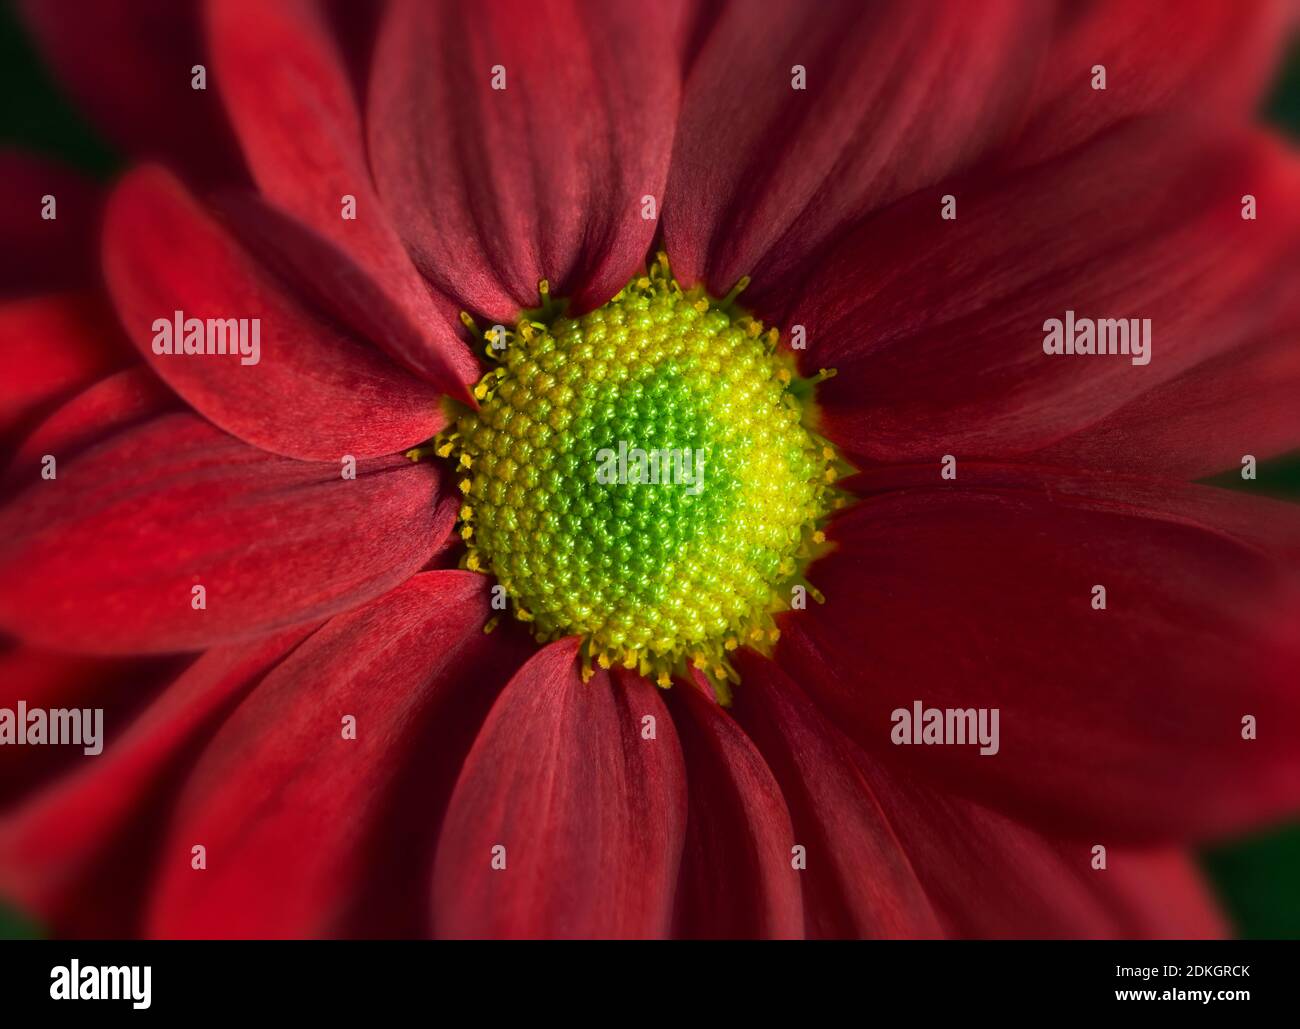 Close up photograph of red daisy gerbera flower showing the stamen and petals Stock Photo